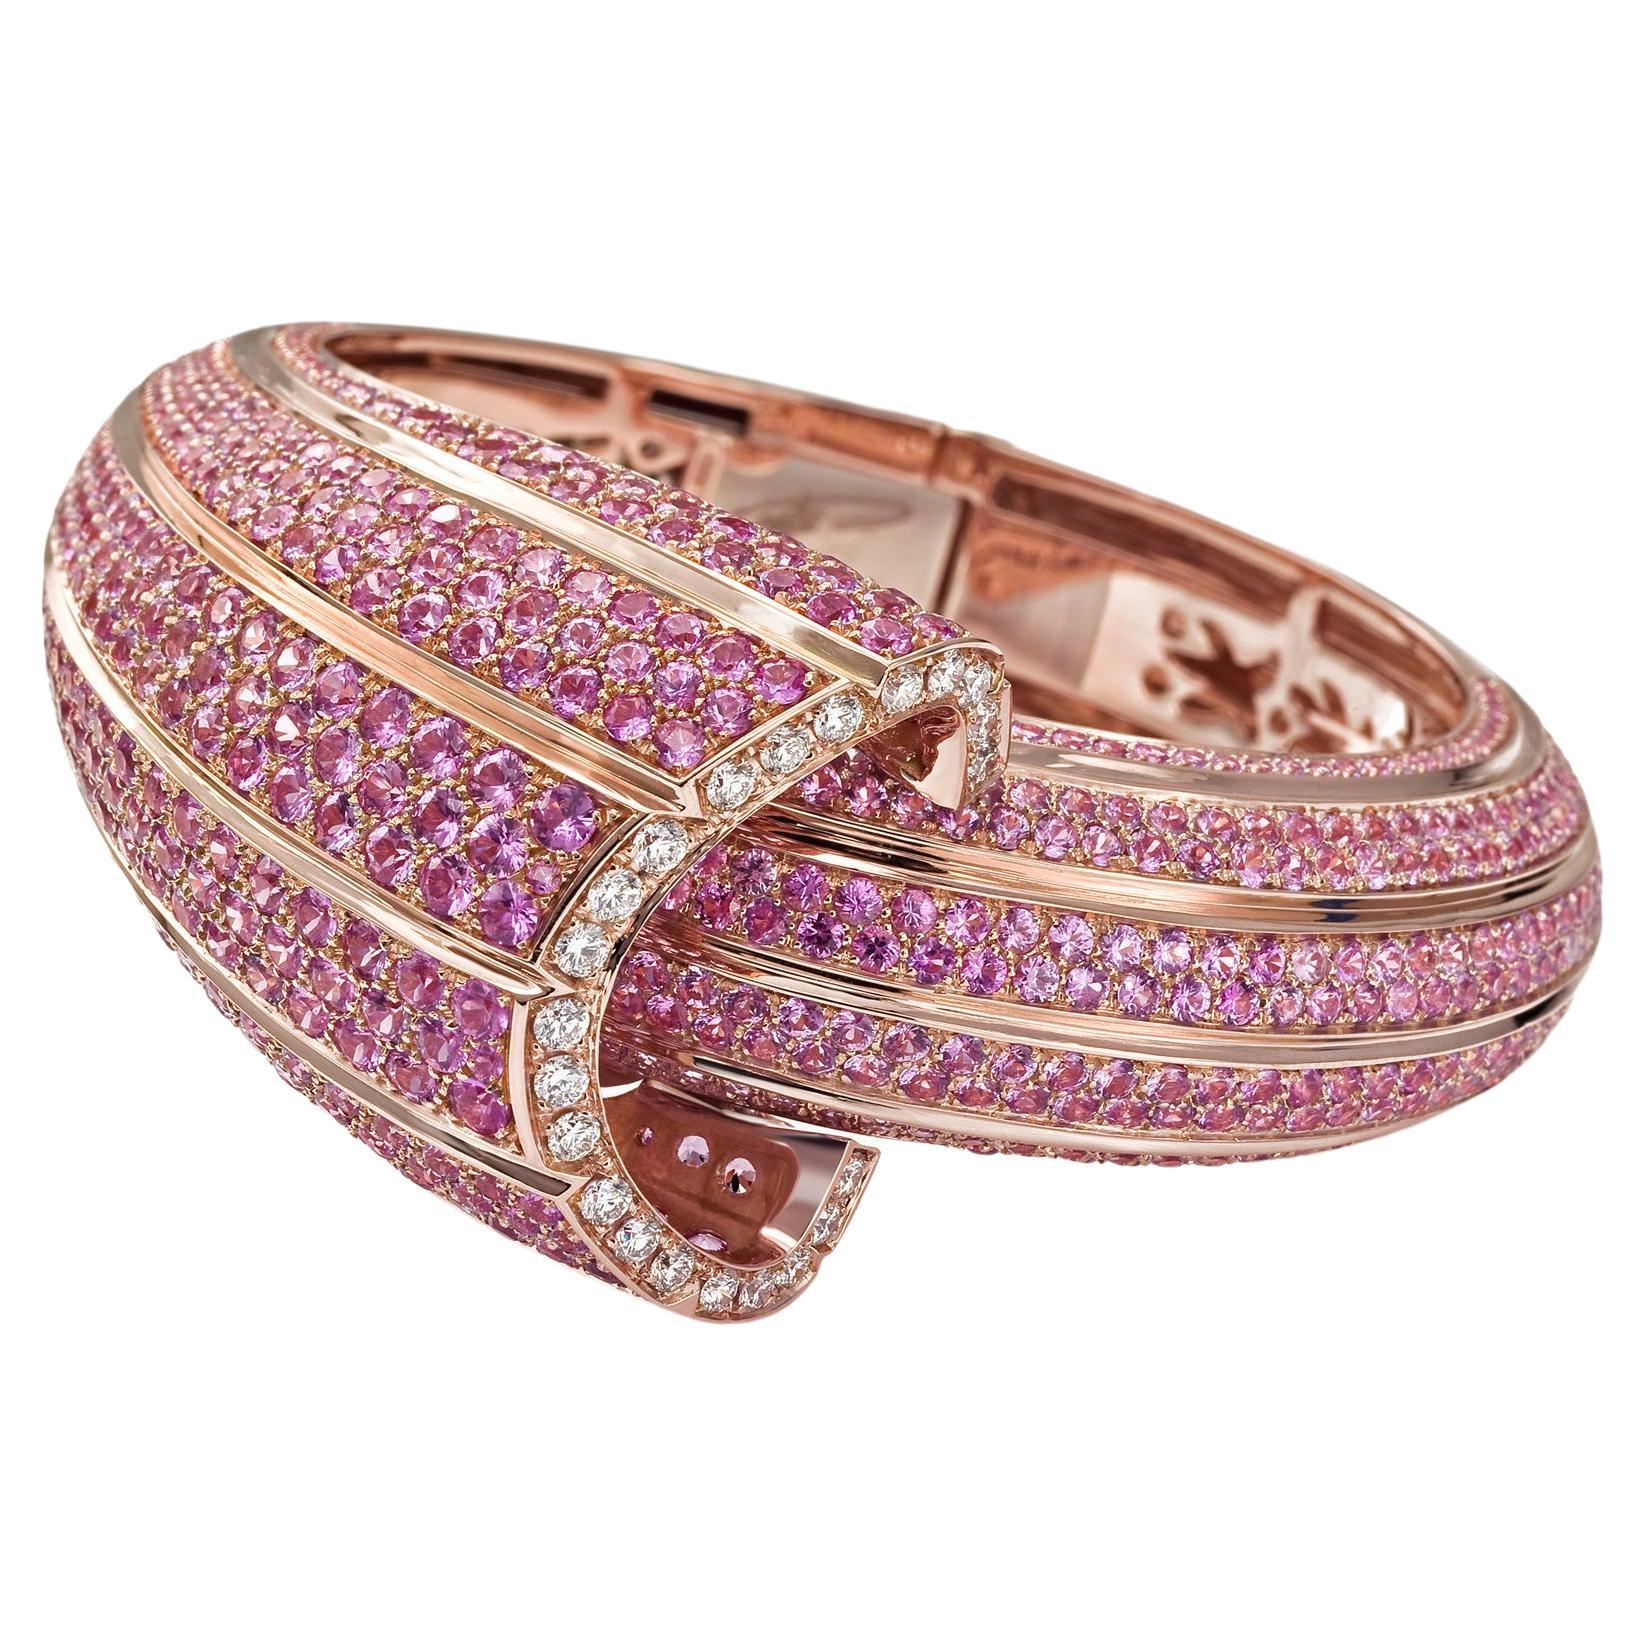 "Costis" Snail Shell Pave Bracelet - 33.81 cts Pink Sapphires, 1.22 cts Diamonds For Sale